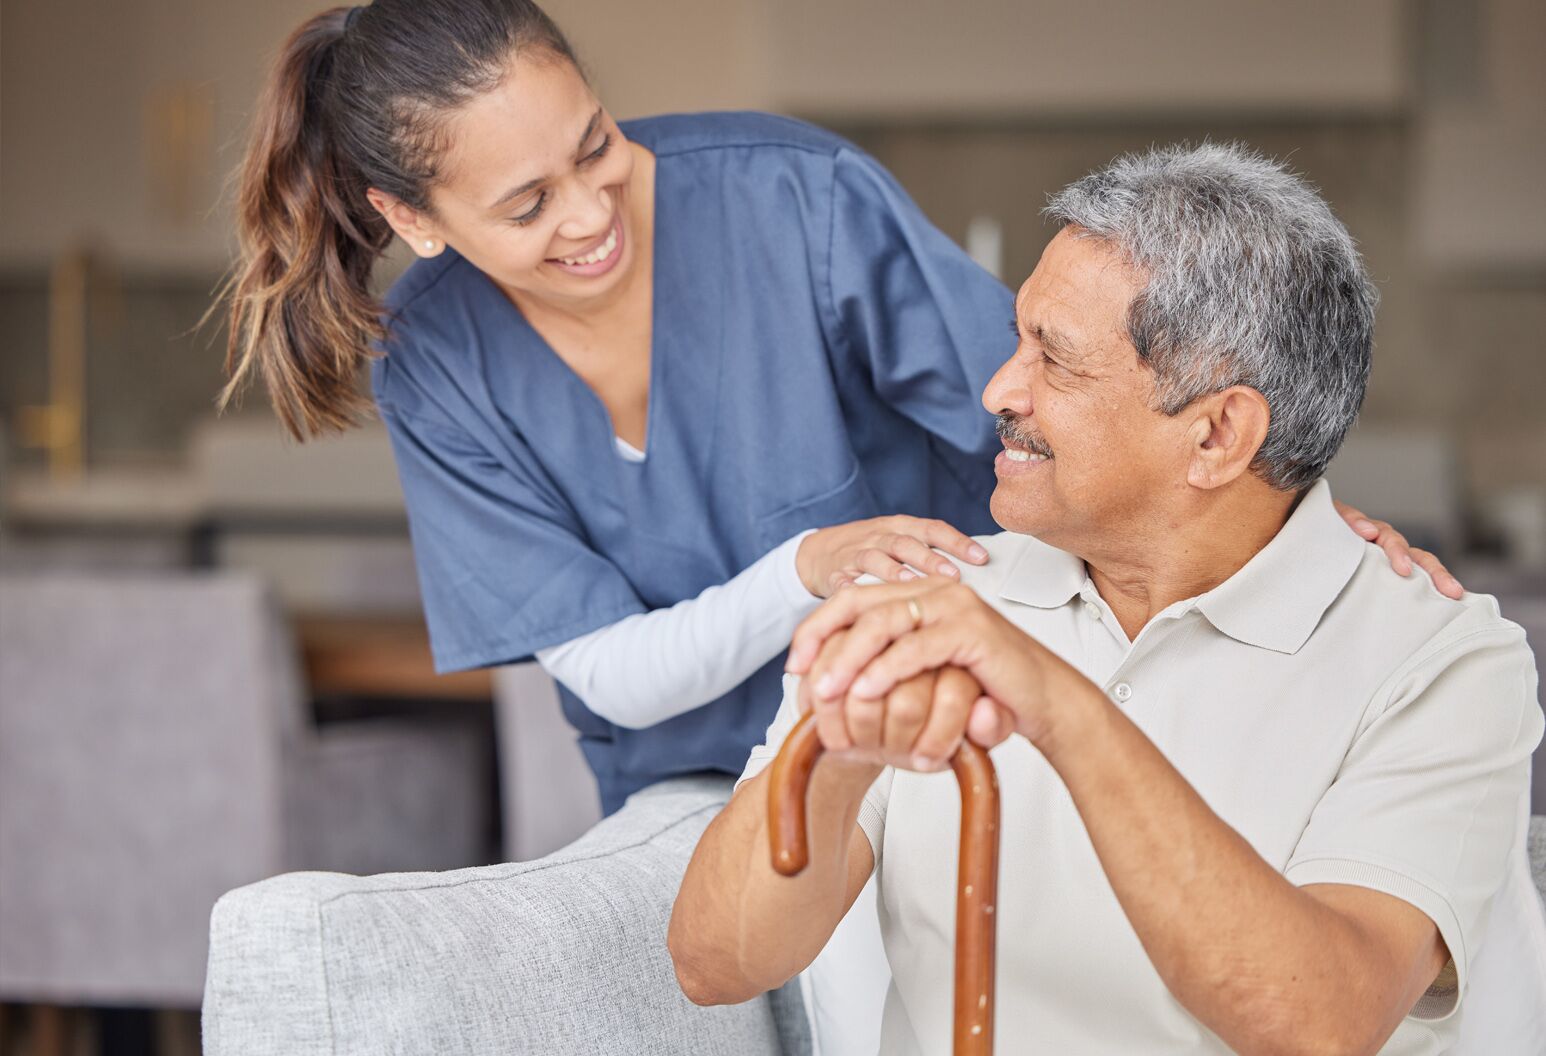 “The Philosophy of Hospice Care: Embracing Compassion and Palliation”